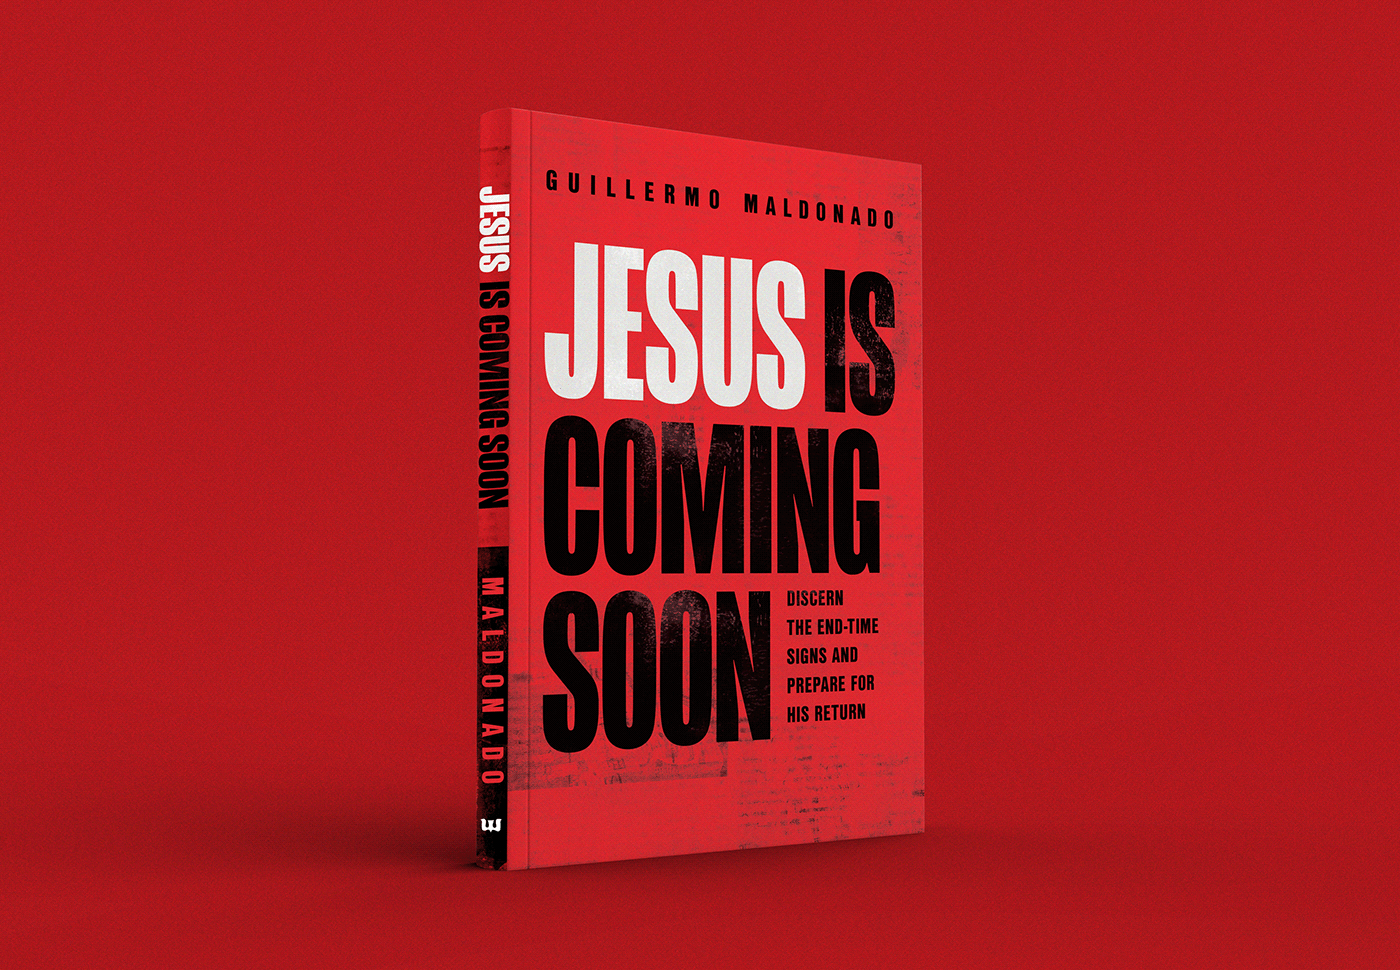 book cover jesus Jesus is coming soon Layout Christian church social media